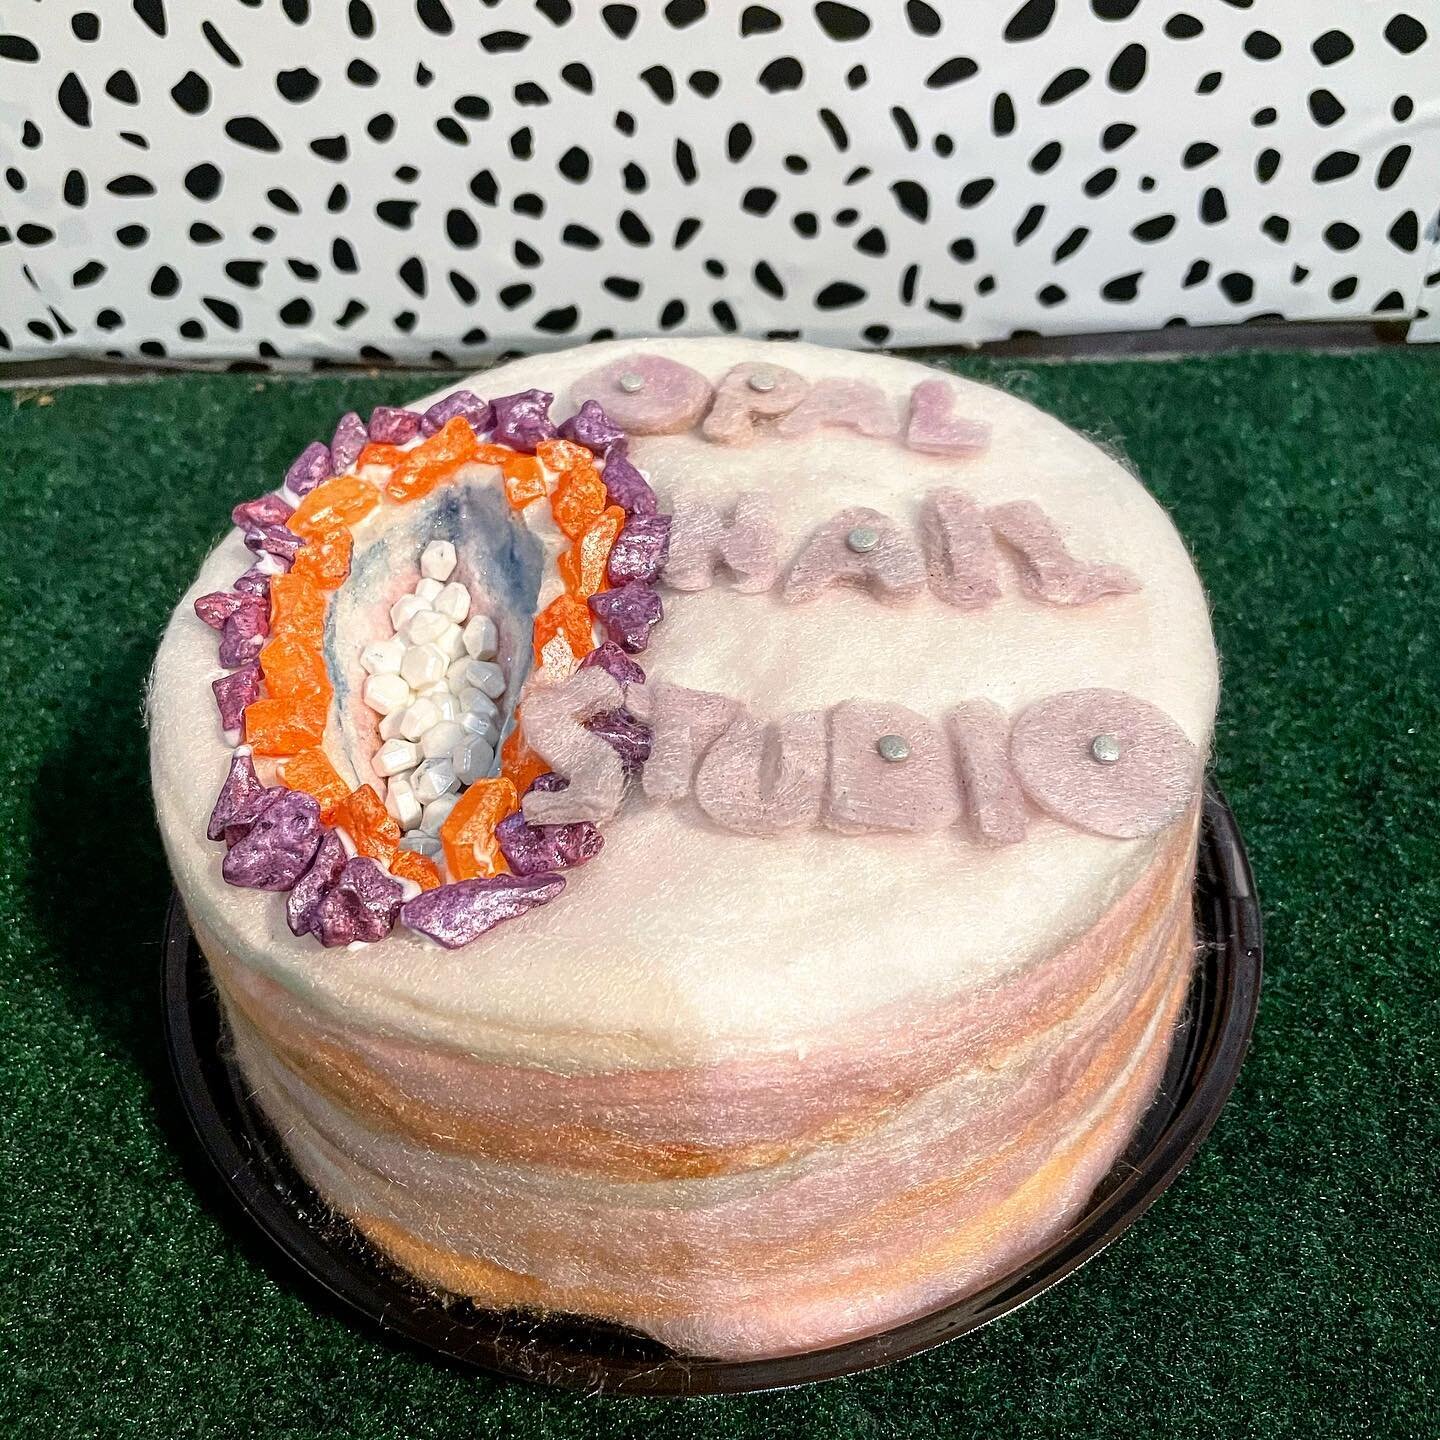 Big Congrats to @opalstudioseattle on their grand opening. We were excited to make our first geode cake for the celebration! Make sure and check them out. Not only do they provide top notch nail services, they are also impeccable artists that can mak